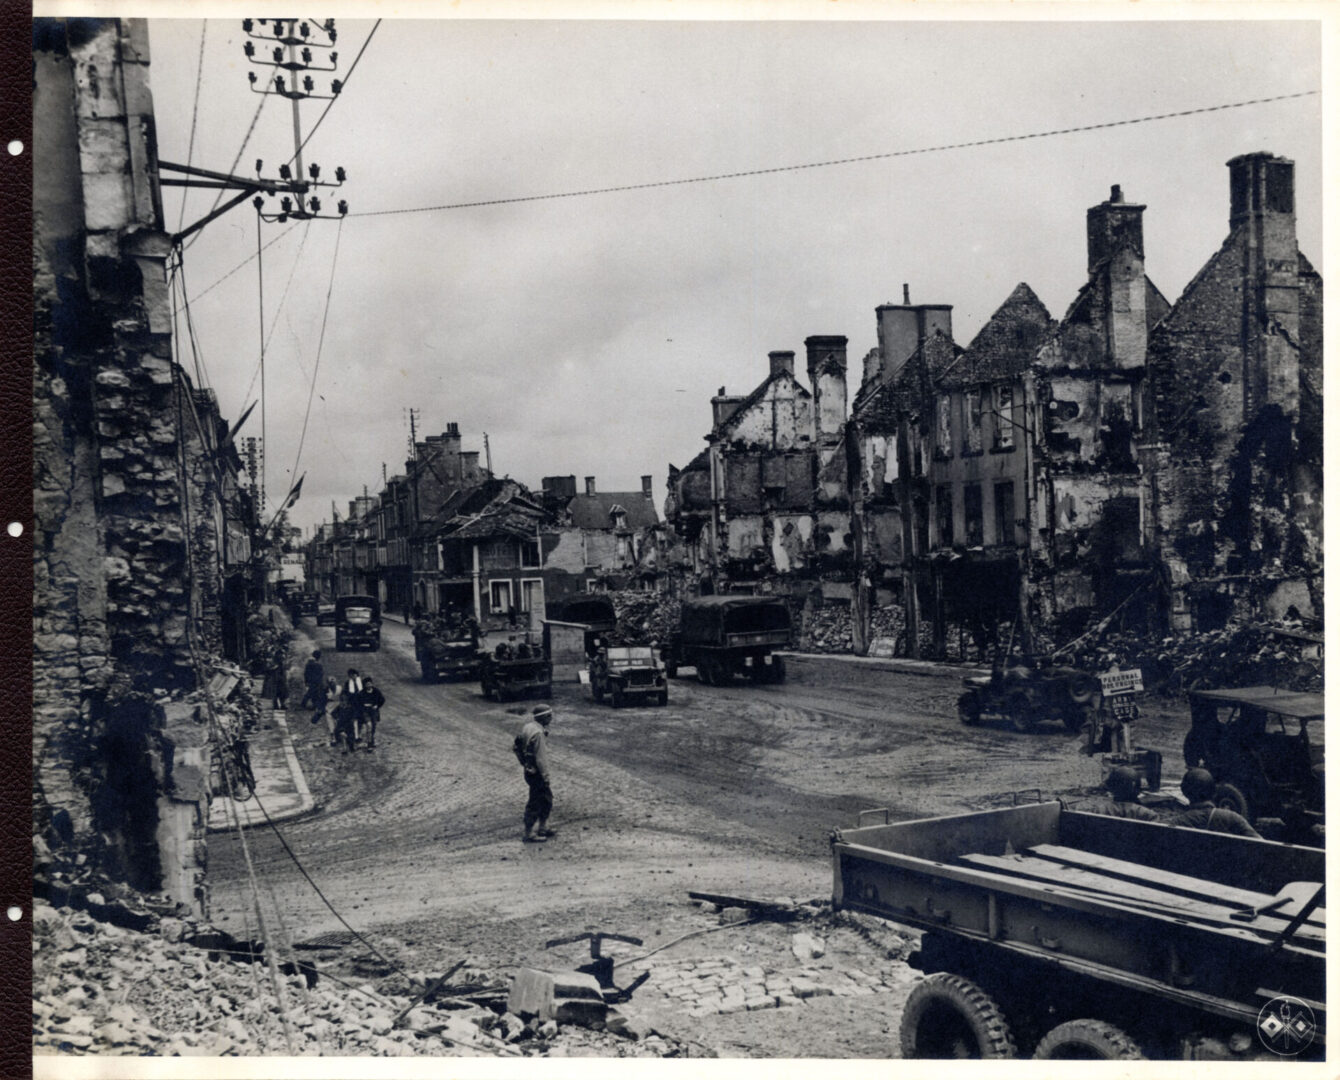 US Convoy passing through the town of Isigny